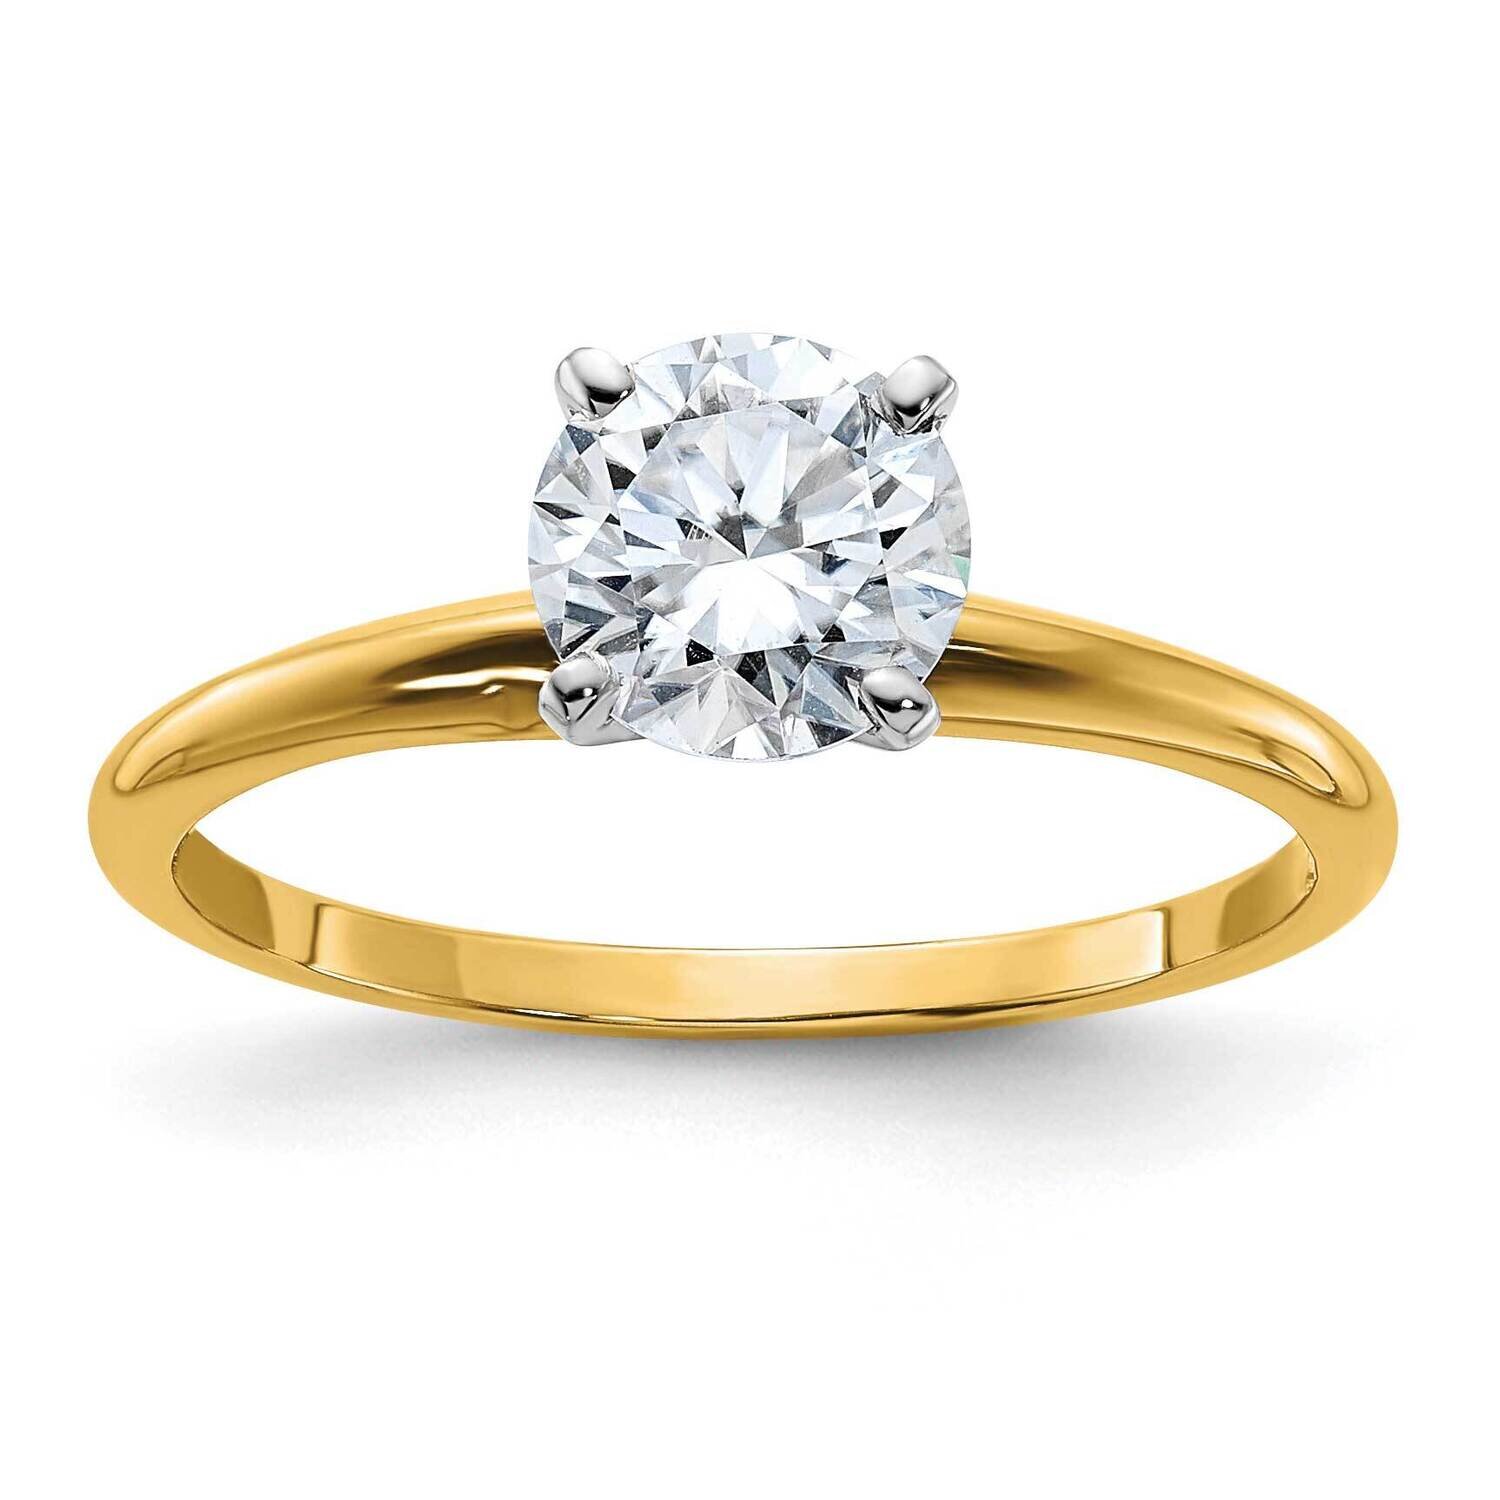 1ct. D E F Pure Light Round Moissanite Solitaire Ring 14k Gold YGSH15-12MP-6